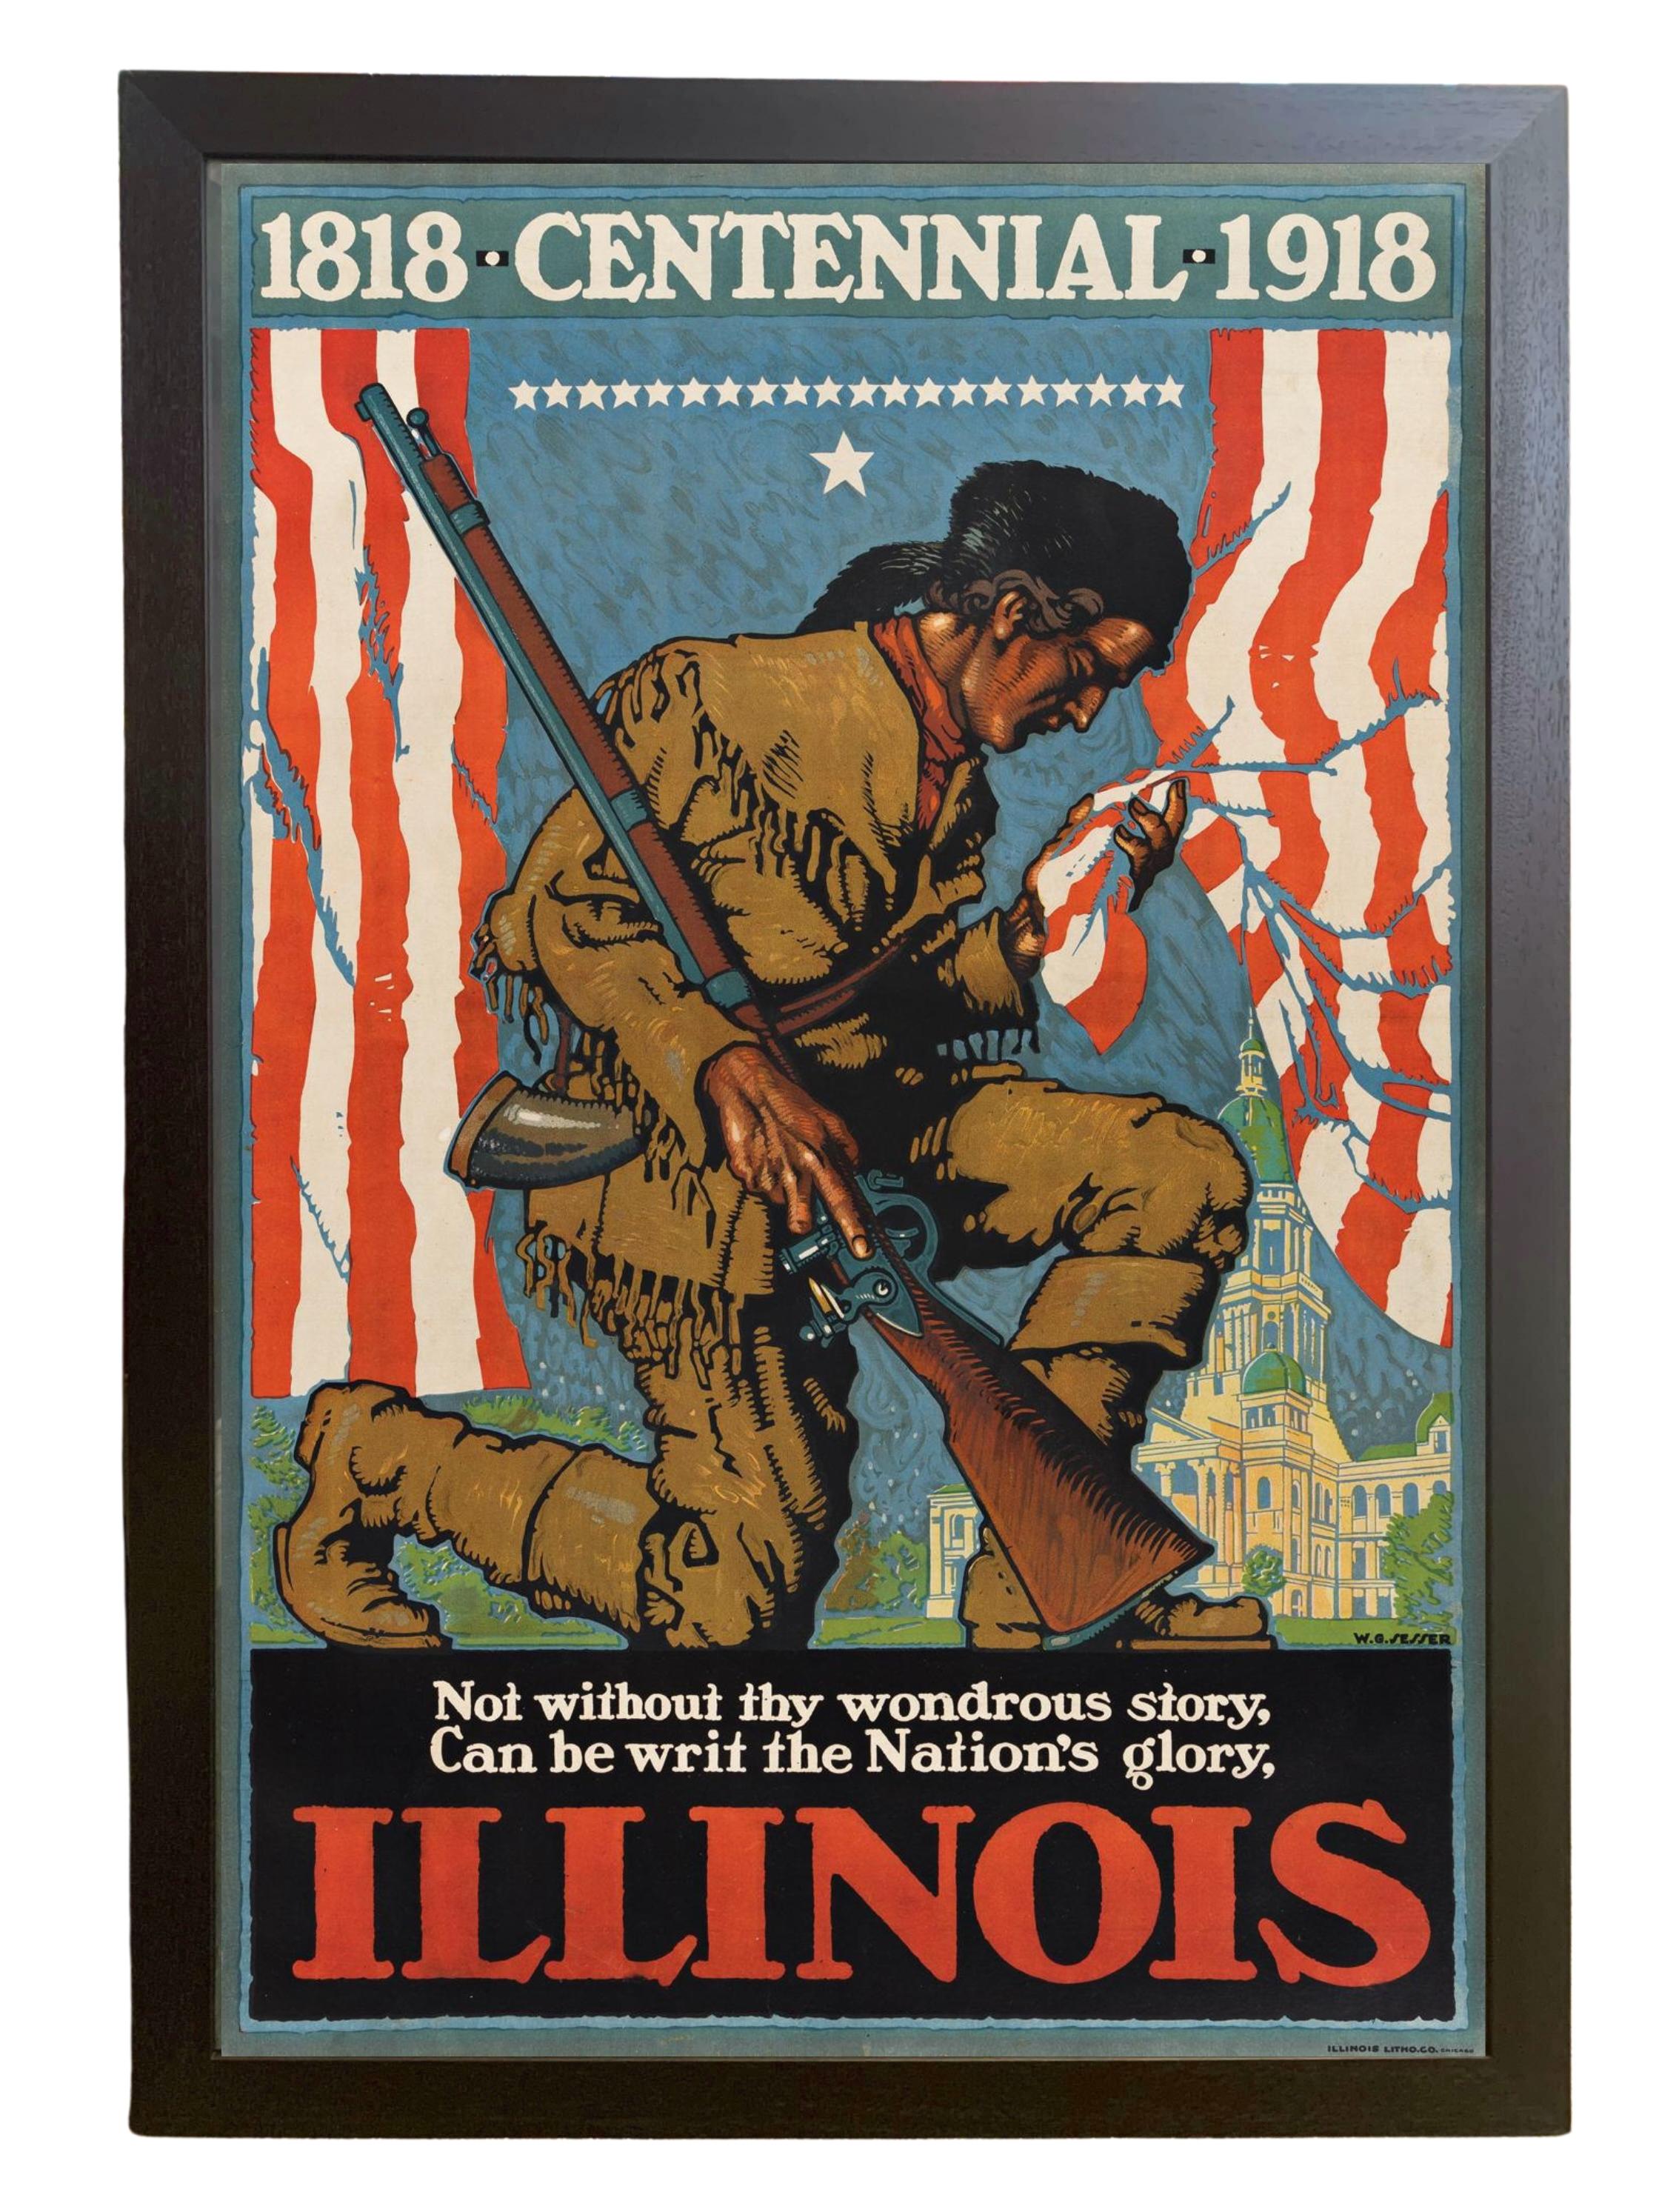 Presented is a very rare and collectible 1918 Illinois Centennial poster by Willy Sesser. The poster is offered here  in its largest issued size, printed in full color. The poster was printed by Illinois Litho. Co., in Chicago. 

A teacher at